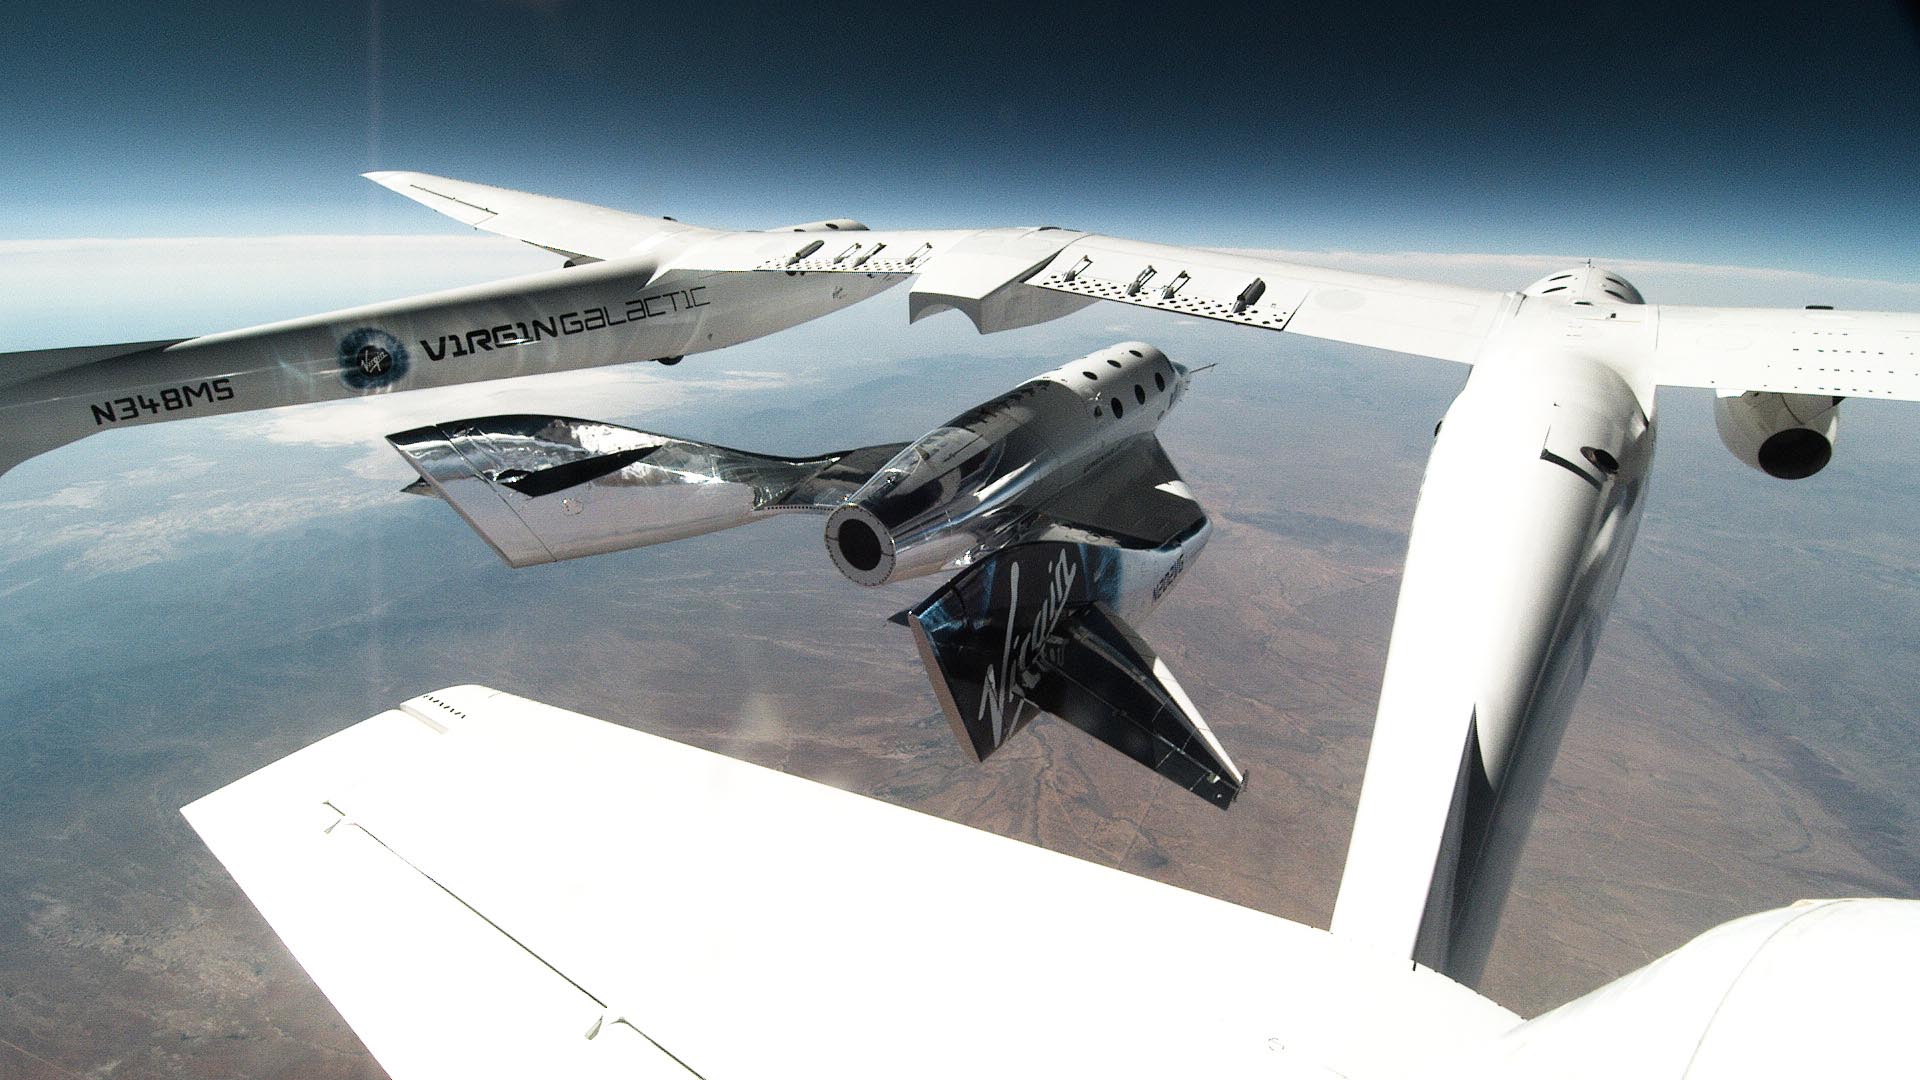 Virgin Galactic completes second test flight of SpaceShipTwo